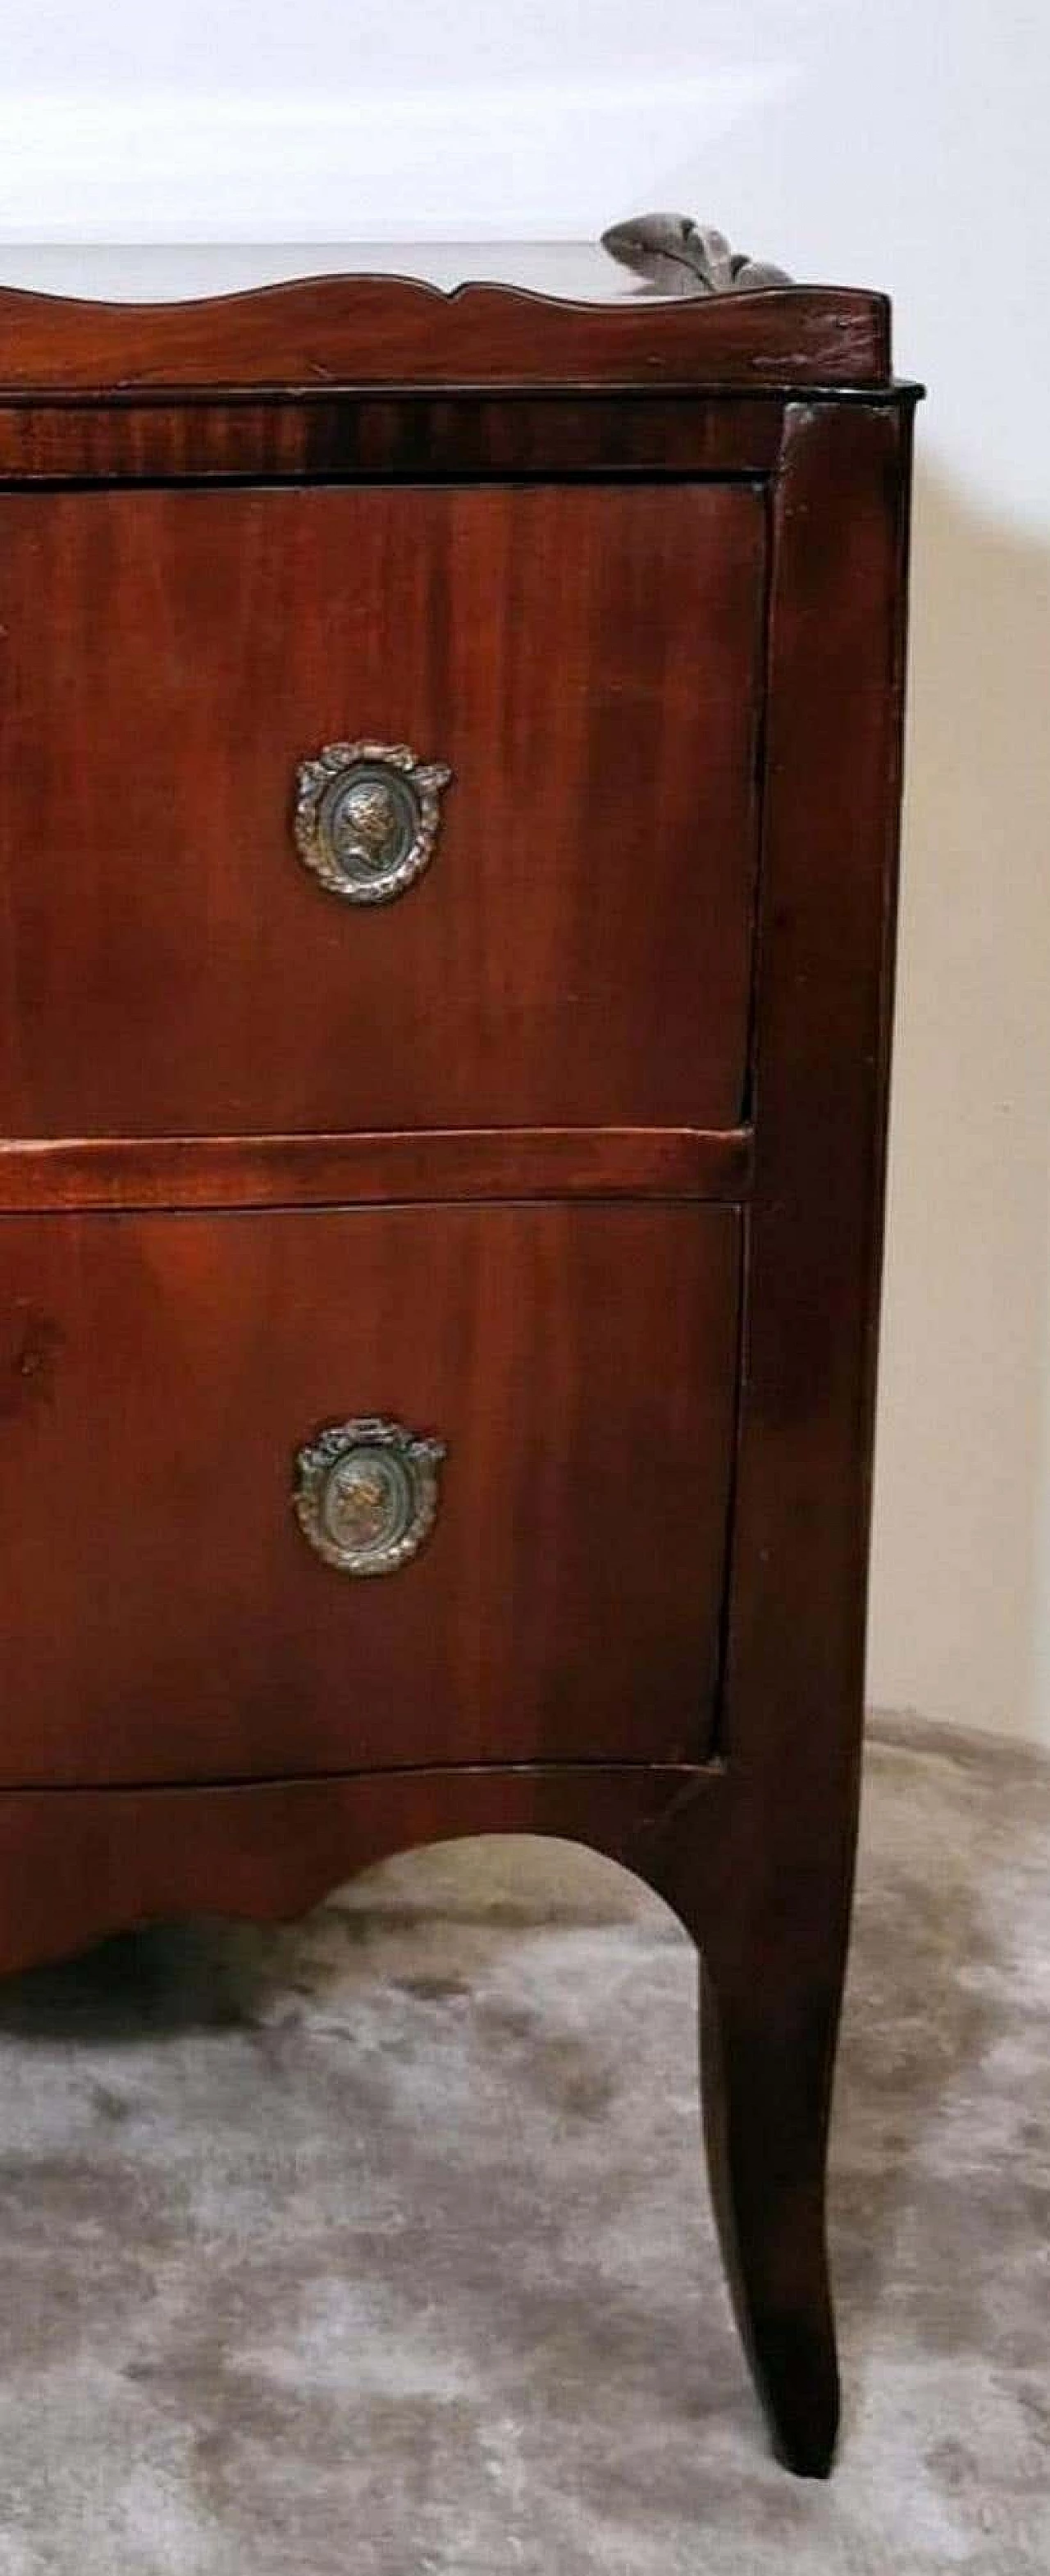 Neoclassical style chest of drawers in mahogany with bronze decorations, 18th century 1332969